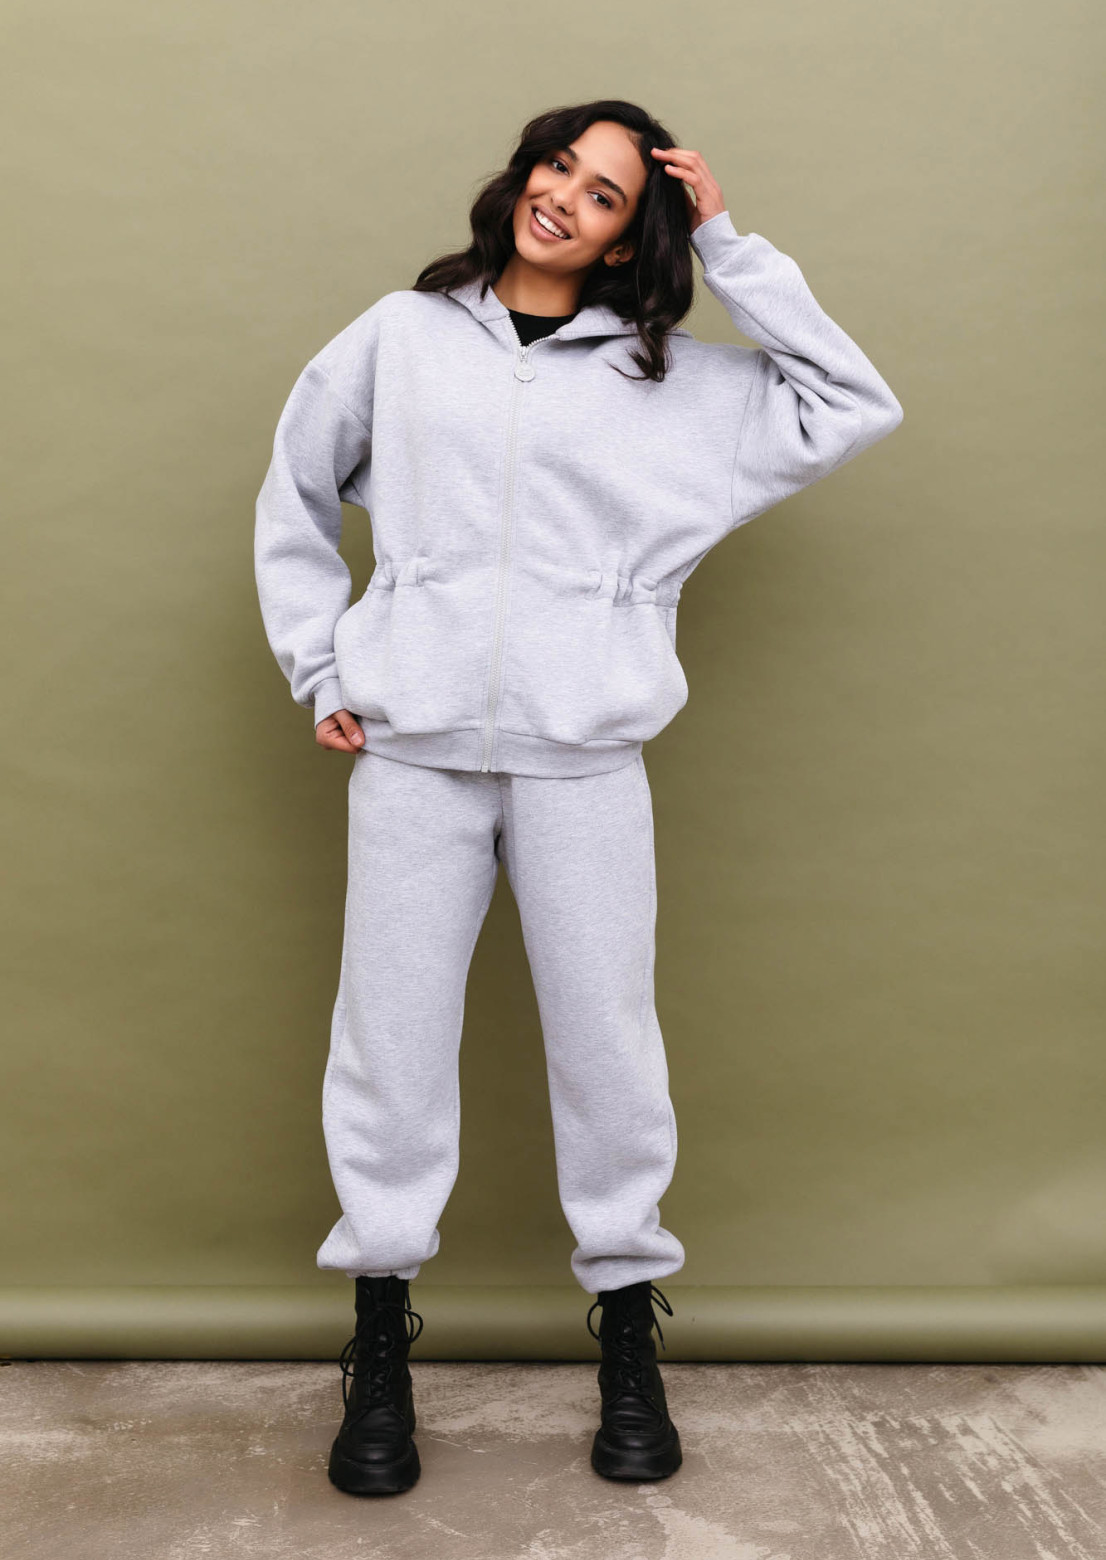 Grey melange color three-thread insulated suit women's hoodie with a zipper